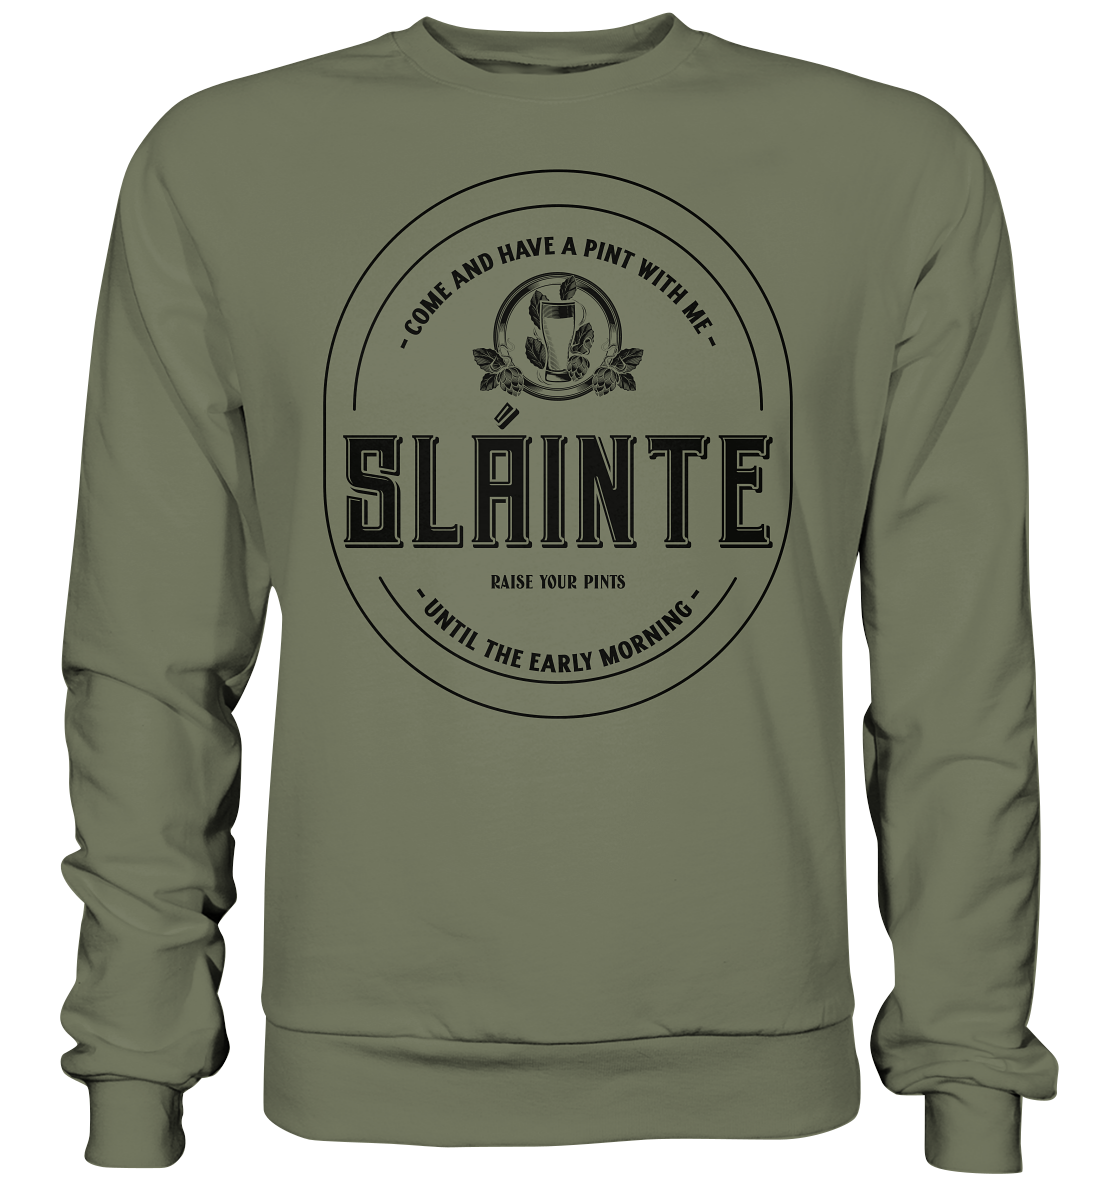 Sláinte "Come And Have A Pint With Me" - Premium Sweatshirt